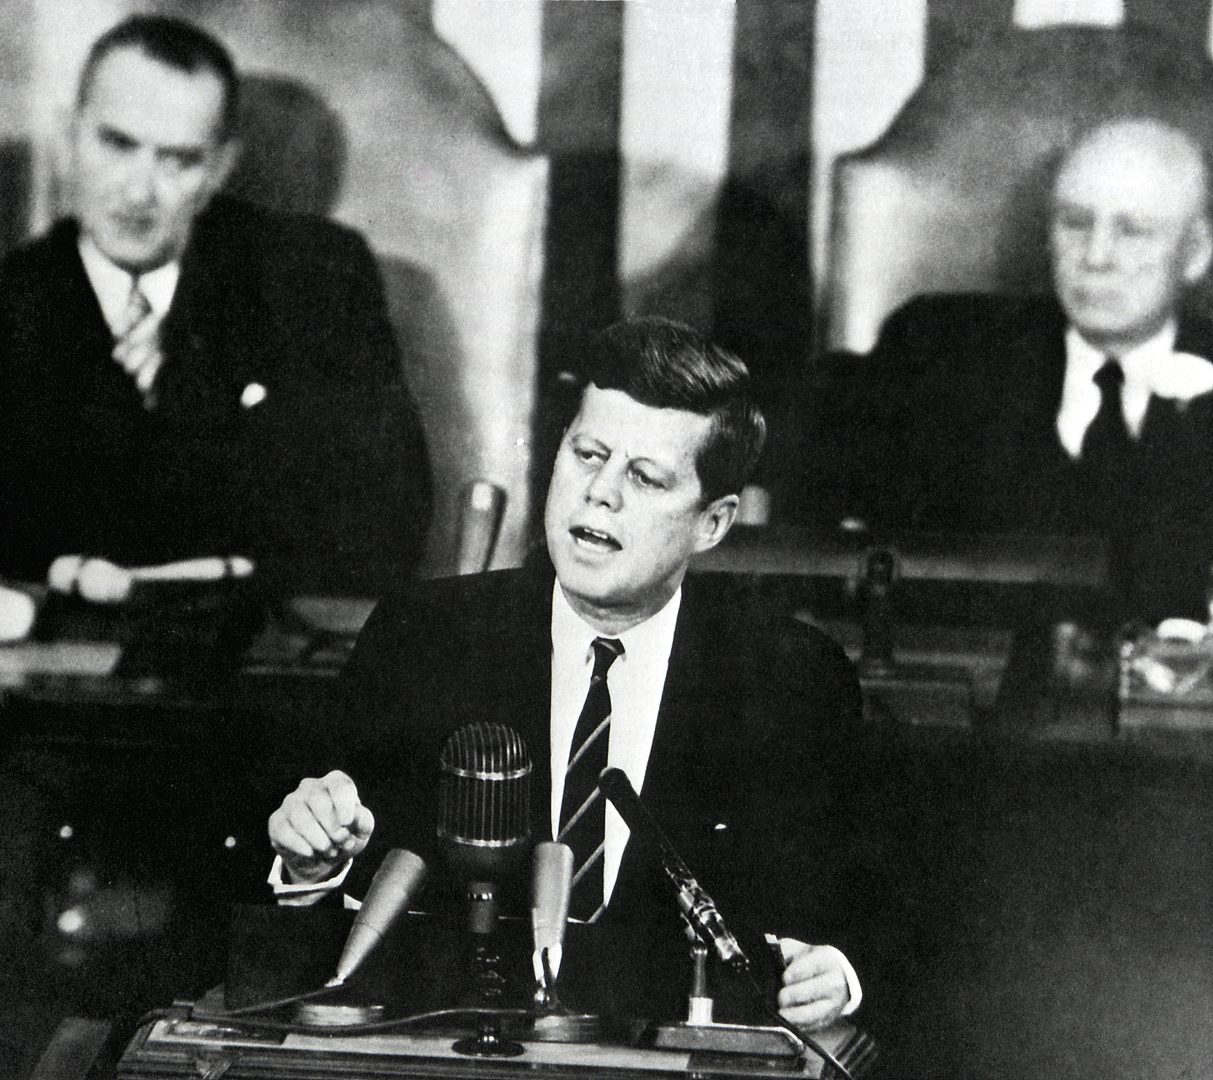 Speaking to Congress and The Nation, President Kennedy said on May 25, 1961; 